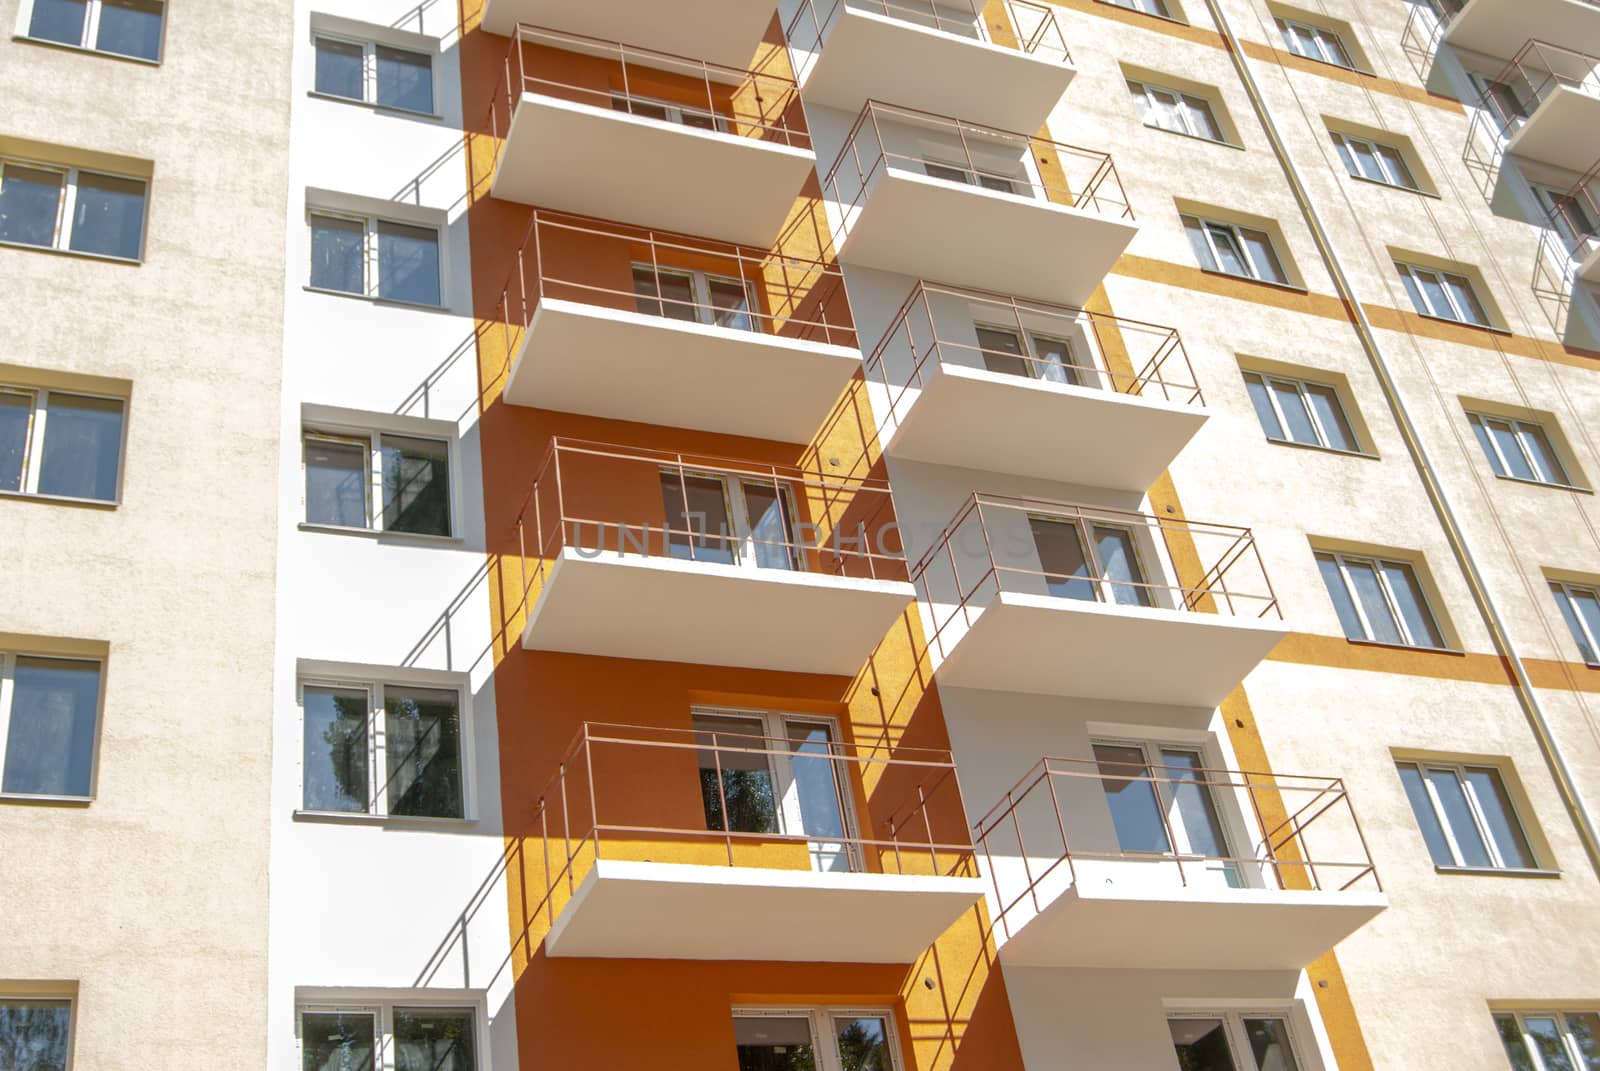 kind of new multistory residential building decorated in orange and yellow colors in sunny day